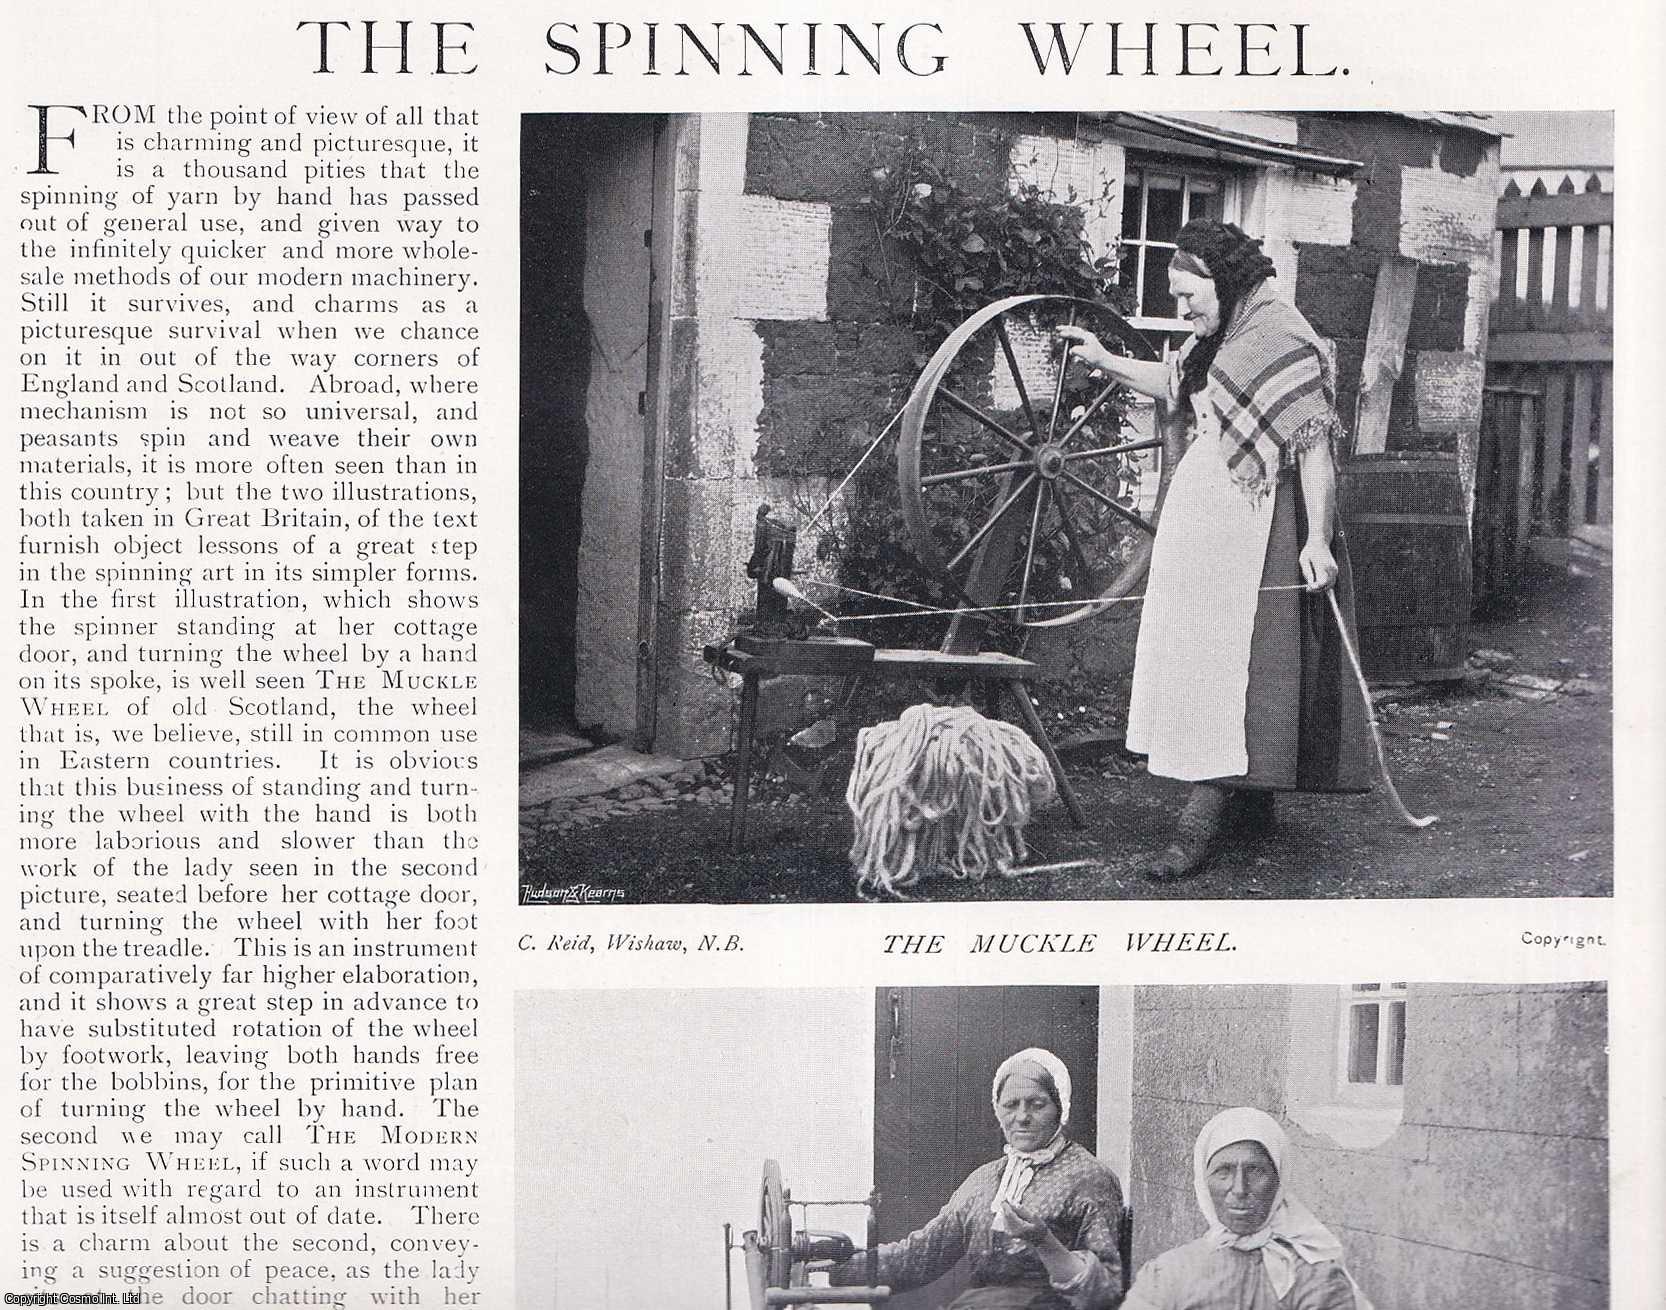 COUNTRY LIFE - The Spinning Wheel. Several pictures and accompanying text, removed from an original issue of Country Life Magazine, 1898.